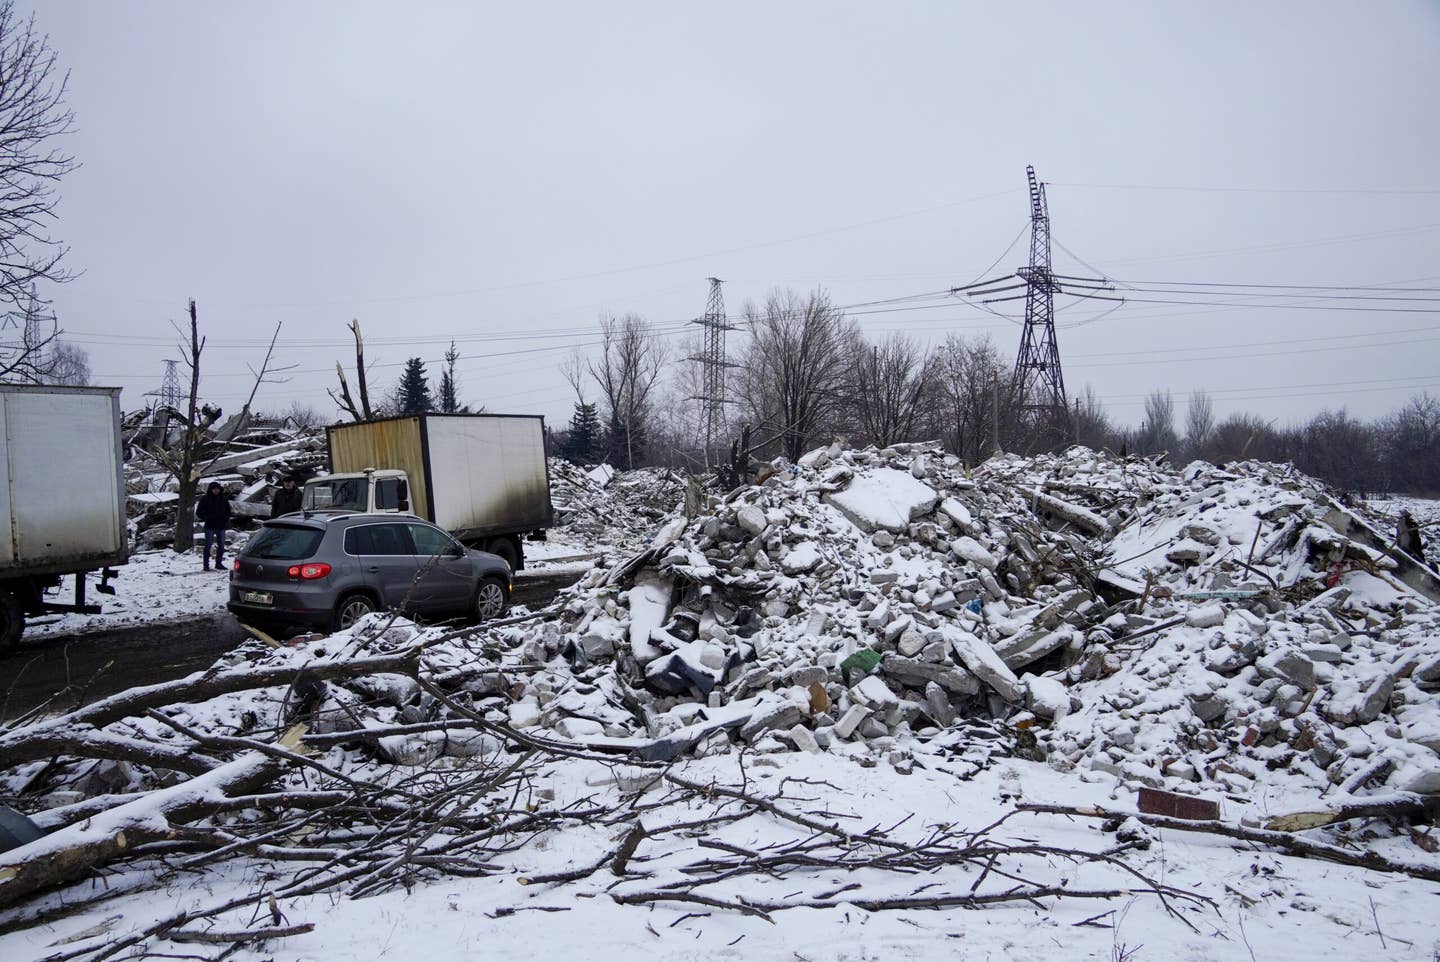 A view of debris at the Russian Armed Forces' temporary deployment location, where scores of Russian troops died after Ukrainian artillery attacks near Makiivka, Ukraine on Jan. 16, 2023. (Photo by Vladimir Aleksandrov/Anadolu Agency via Getty Images)